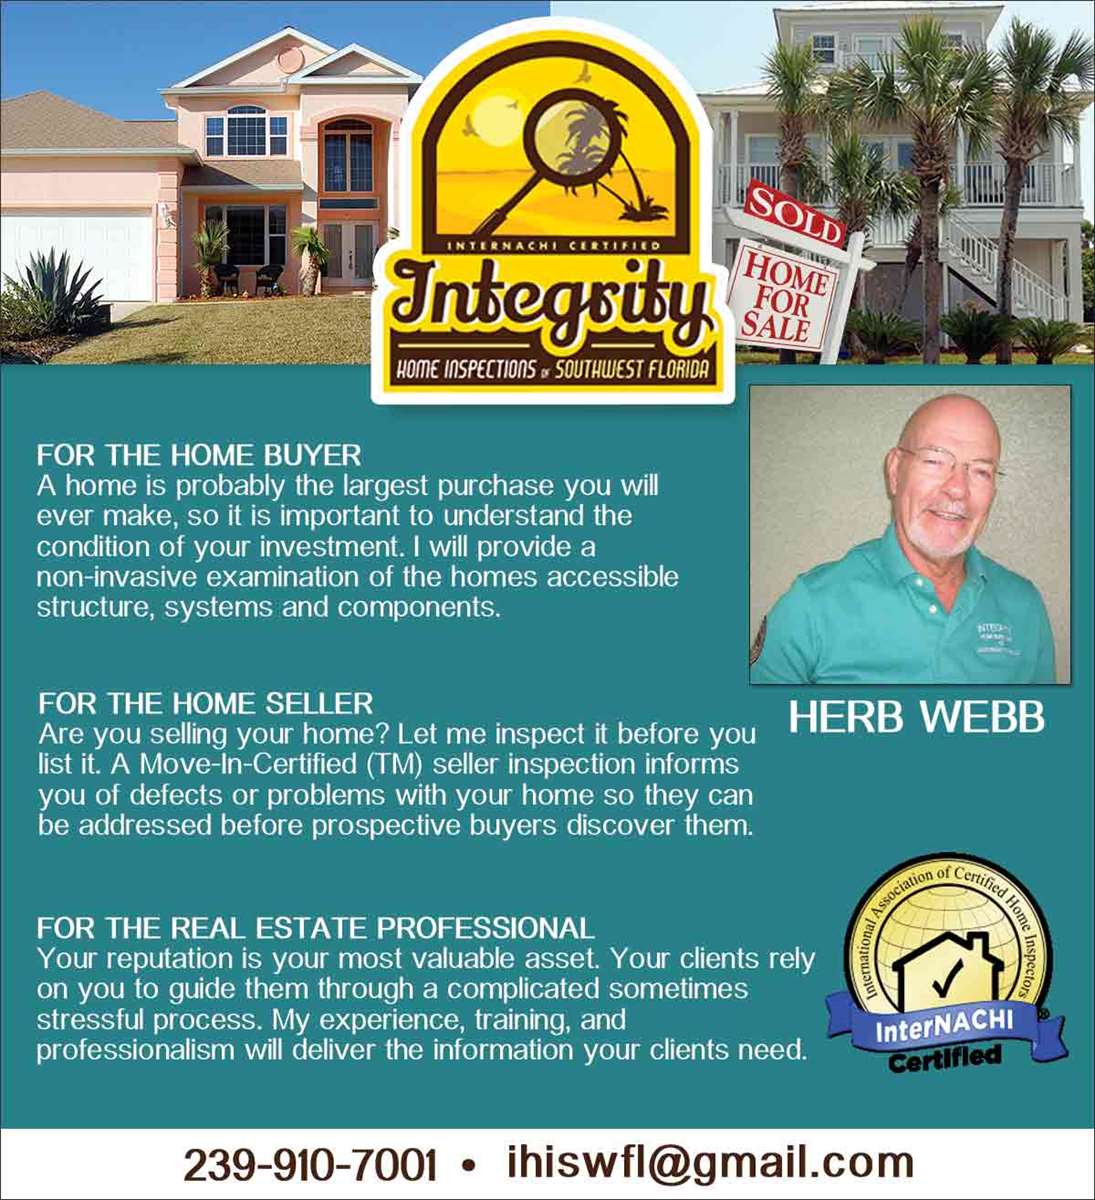 integrity plus home inspections in greenville